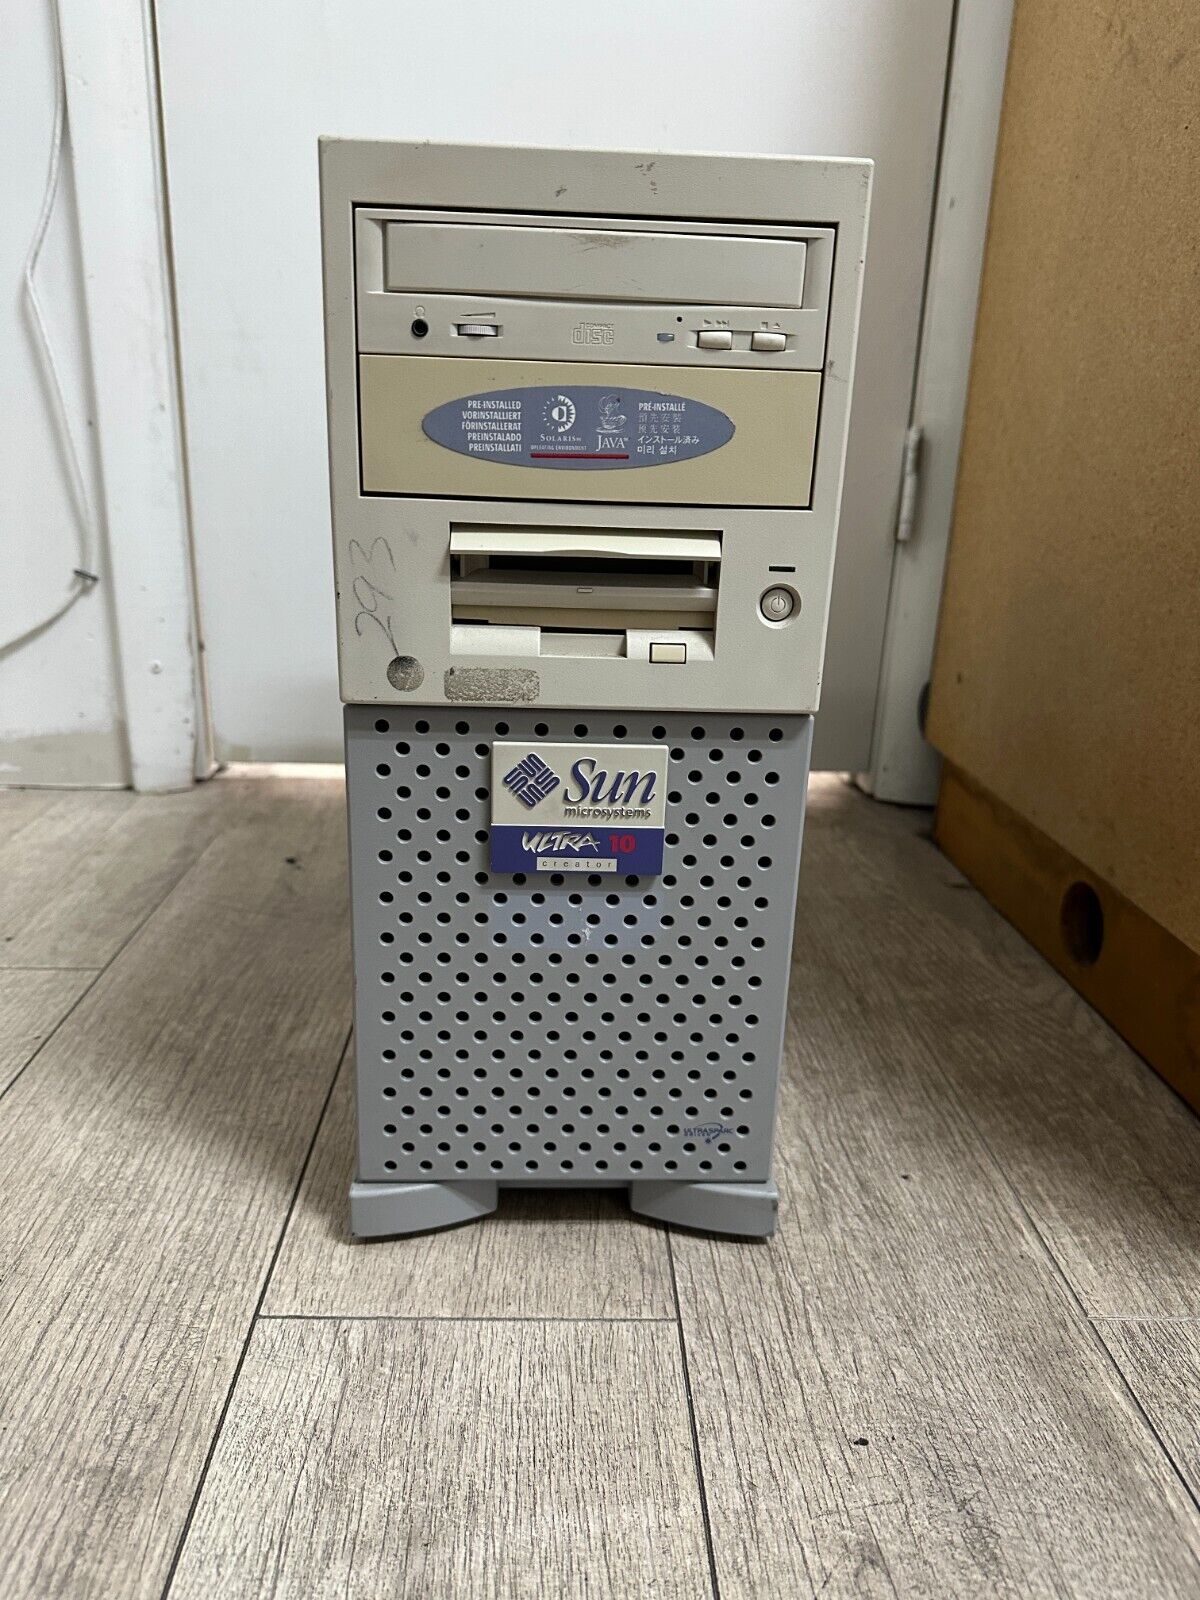 Sun Microsystems Ultra 10 Workstation - SEE VIDEO - AS IS NO RETURNS